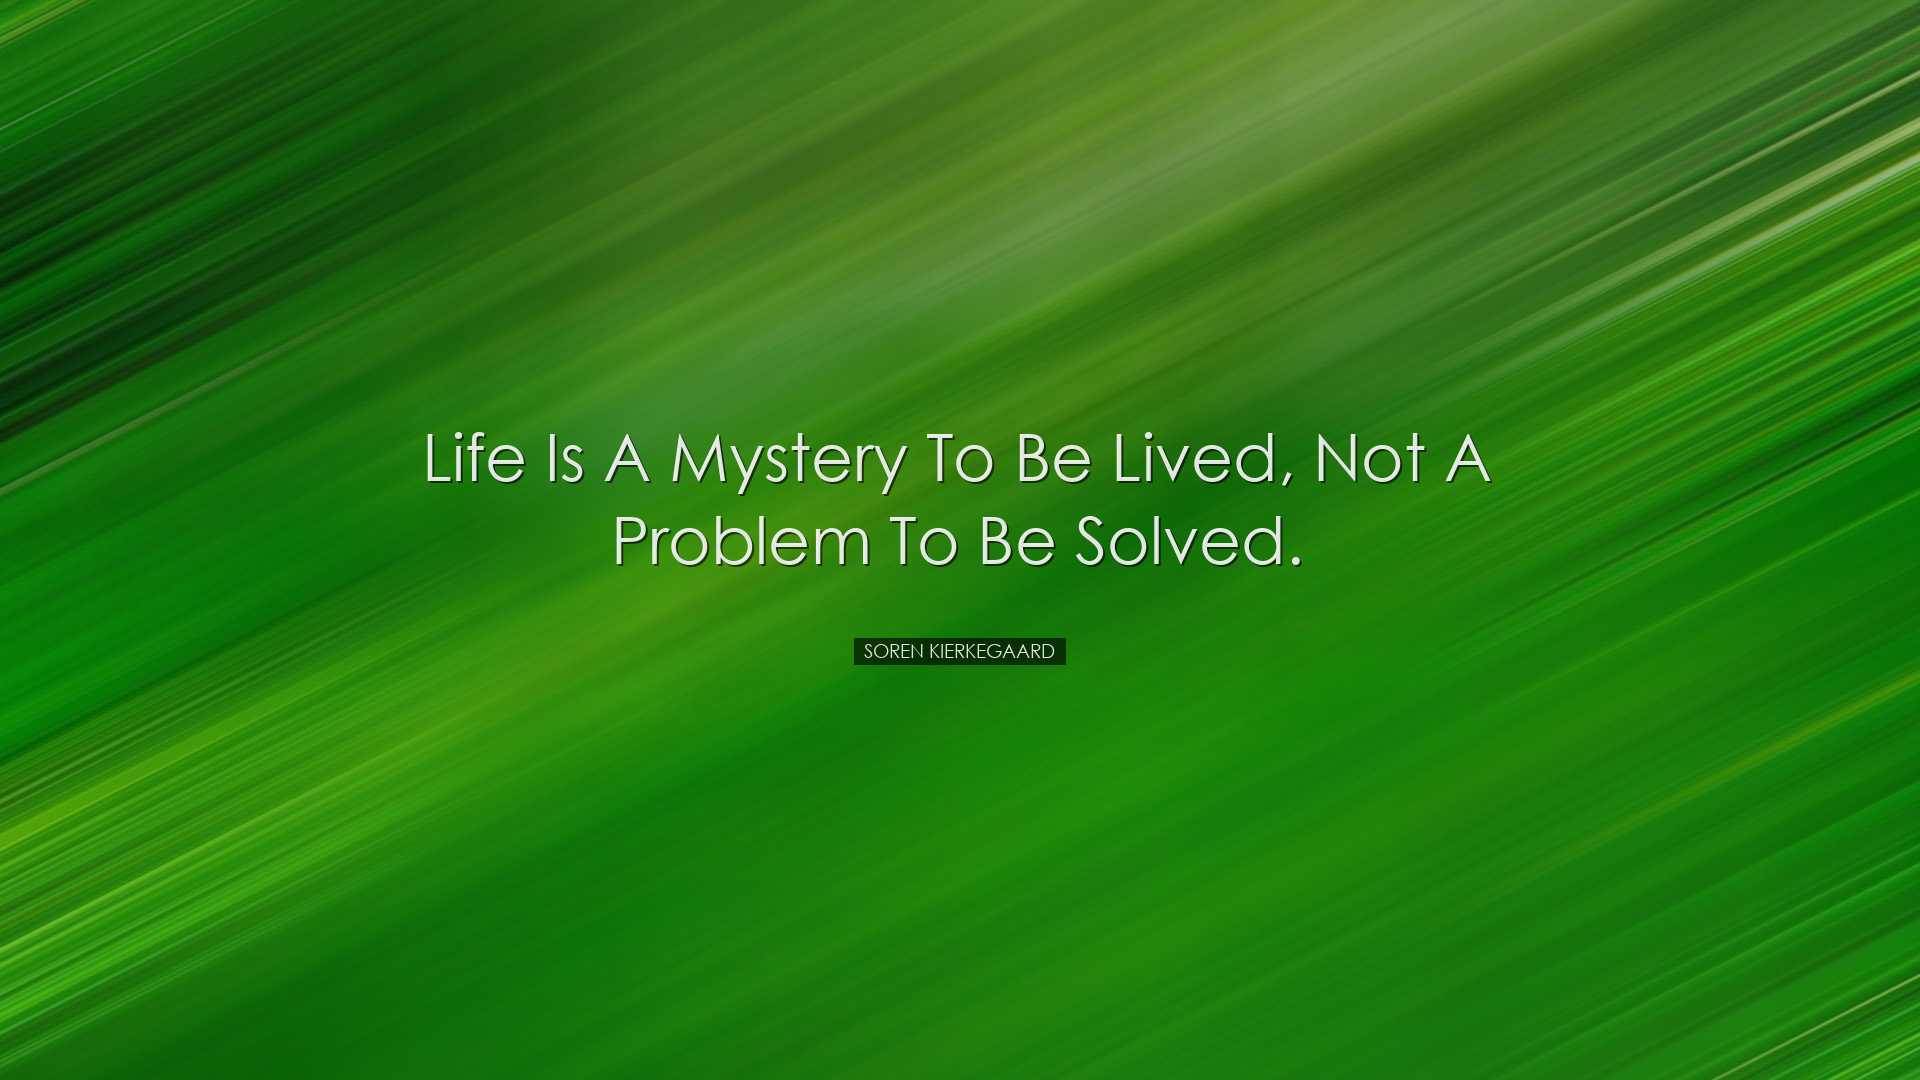 Life is a mystery to be lived, not a problem to be solved. - Soren